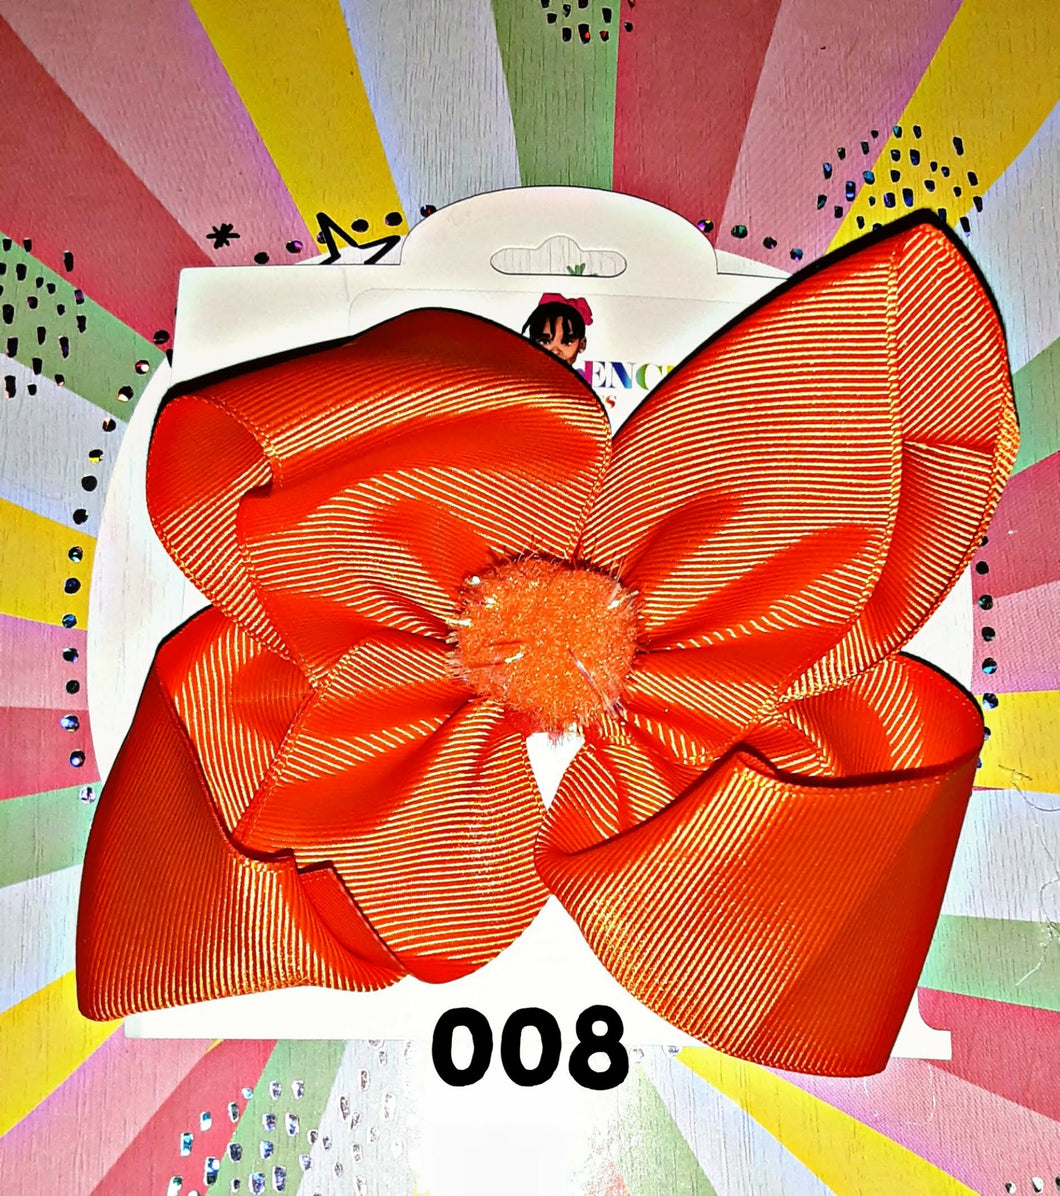 6 Inch Solid Colored Hair Bow with Pom